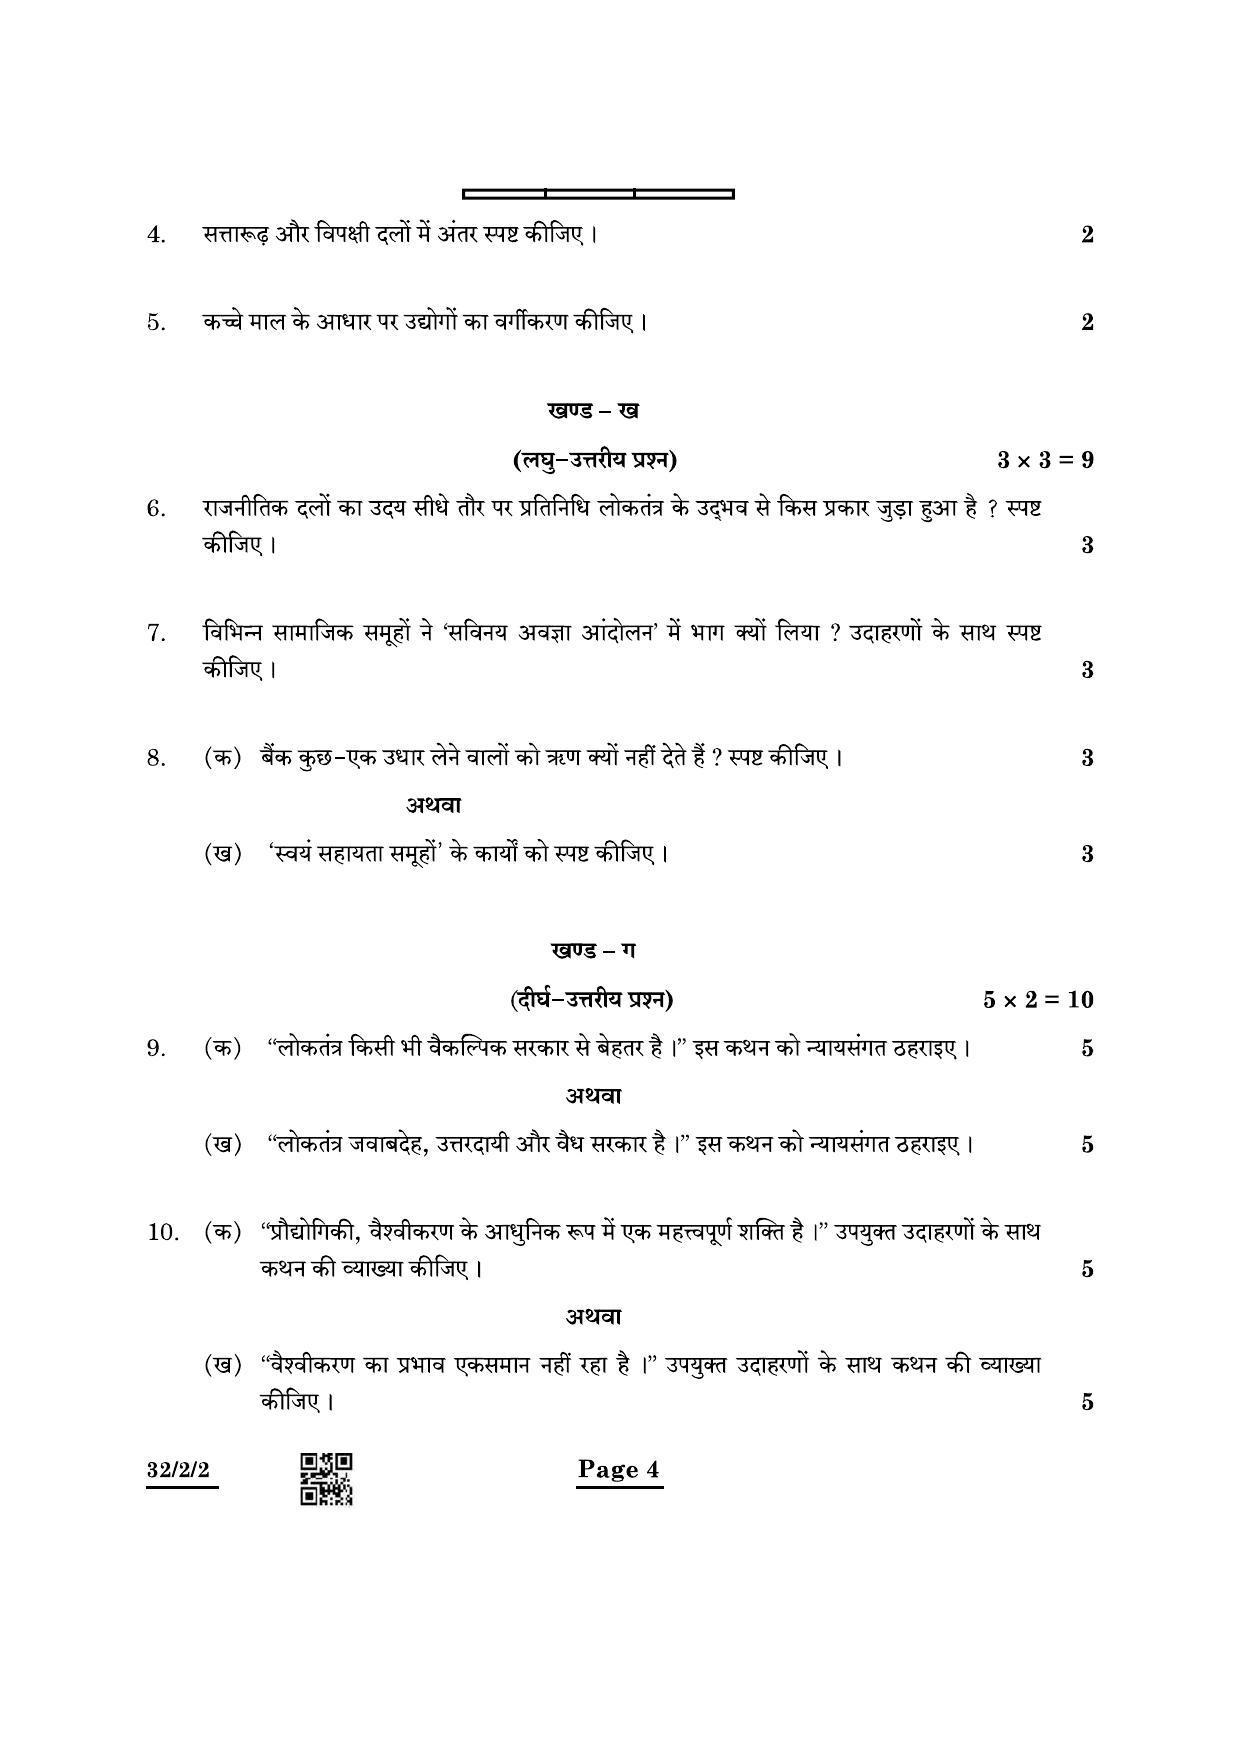 CBSE Class 10 32-2-2 Social Science 2022 Question Paper - Page 4